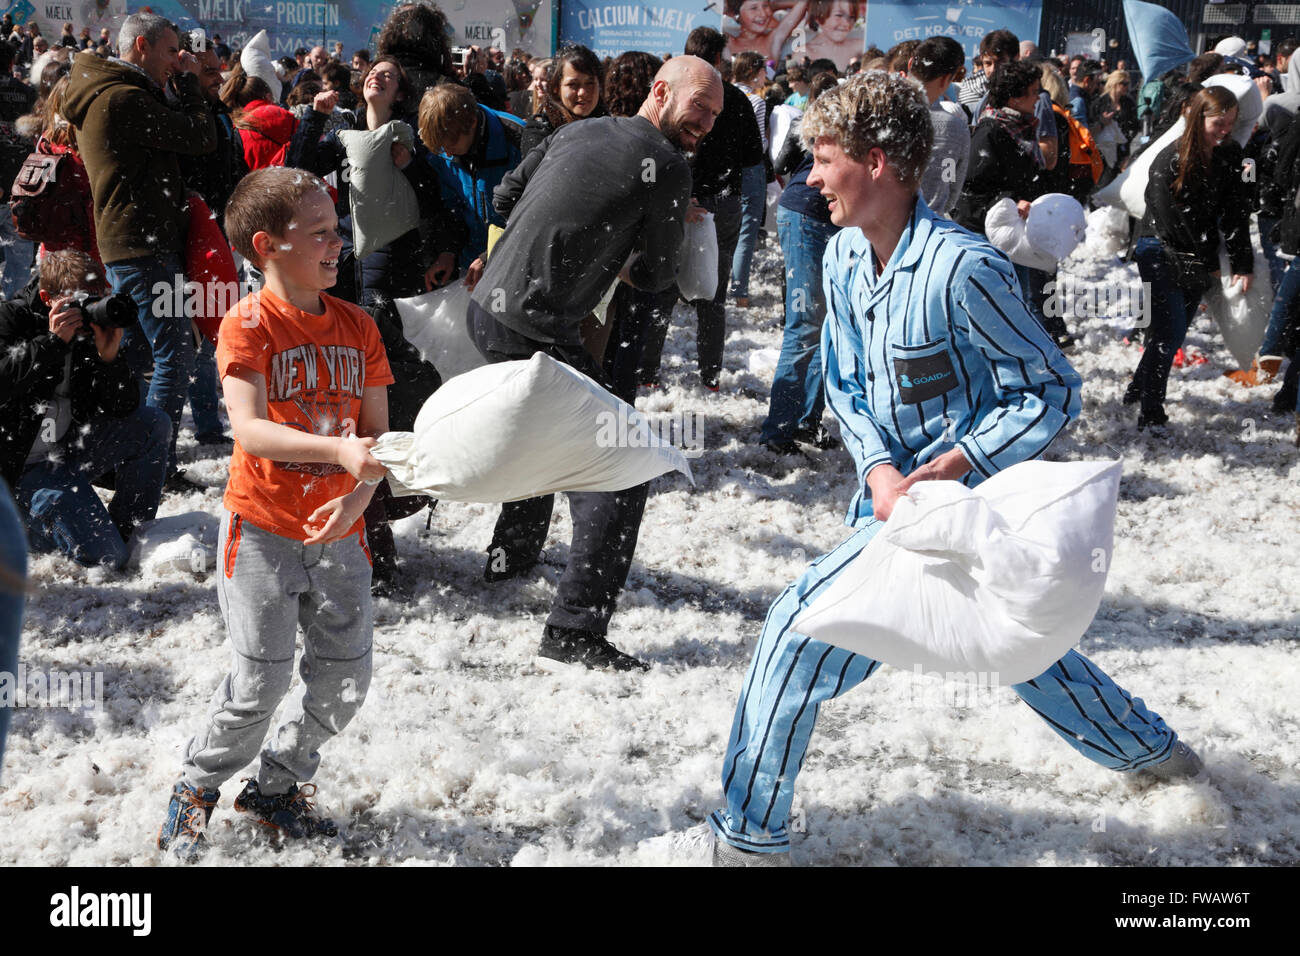 Copenhagen, Denmark, 2nd April, 2016. Massive pillow fights in the City Hall Square in Copenhagen on the 7th International Pillow Fight Day attract many hundreds of participants and spectators of all ages on this sunny Saturday afternoon. More than 100 cities around the world take part in this spectacular and funny annual event. Behind the idea is the Urban Playground Movement, a playful part of the larger public space movement. Credit:  Niels Quist/Alamy Live News Stock Photo